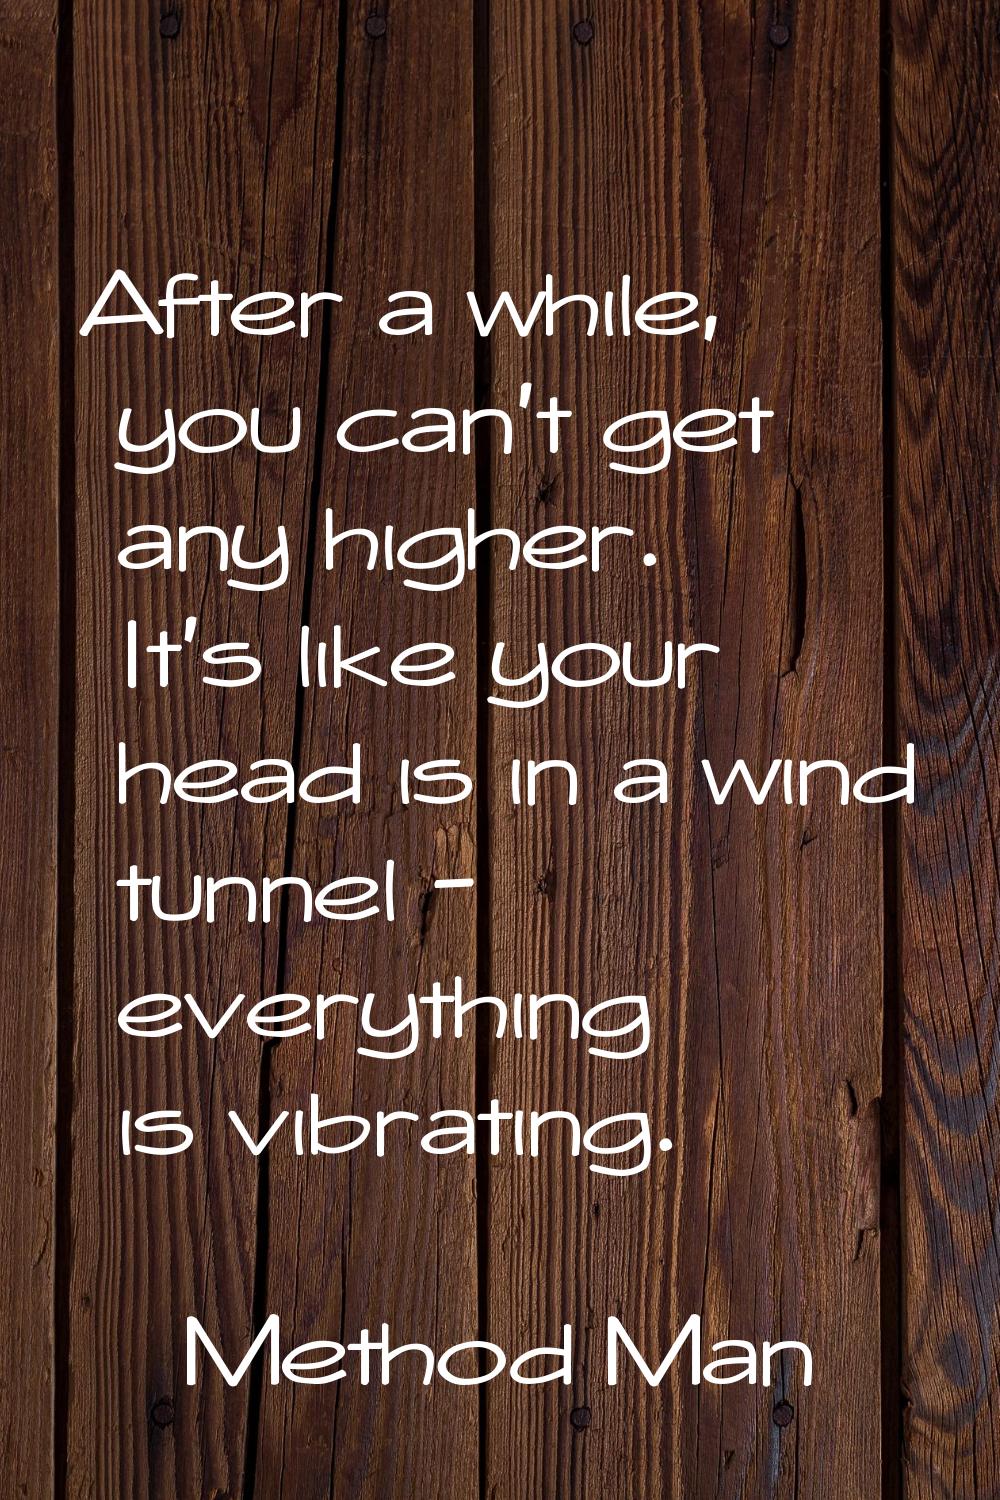 After a while, you can't get any higher. It's like your head is in a wind tunnel - everything is vi